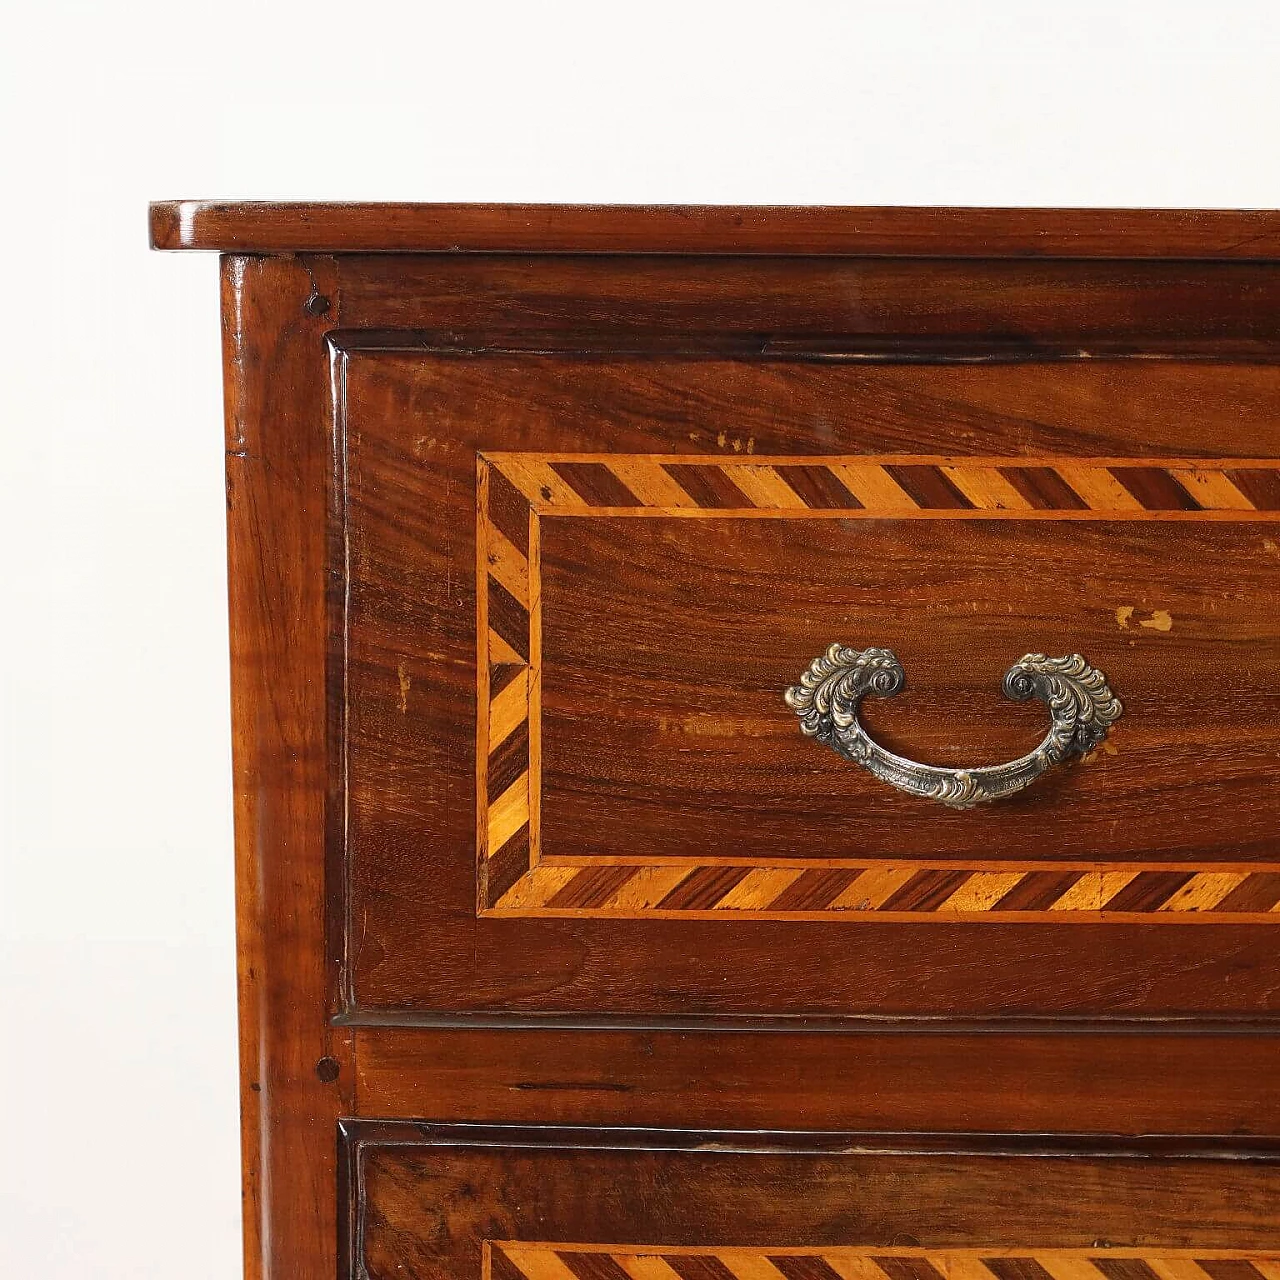 Neoclassical walnut canterano with maple inlays, 18th century 4